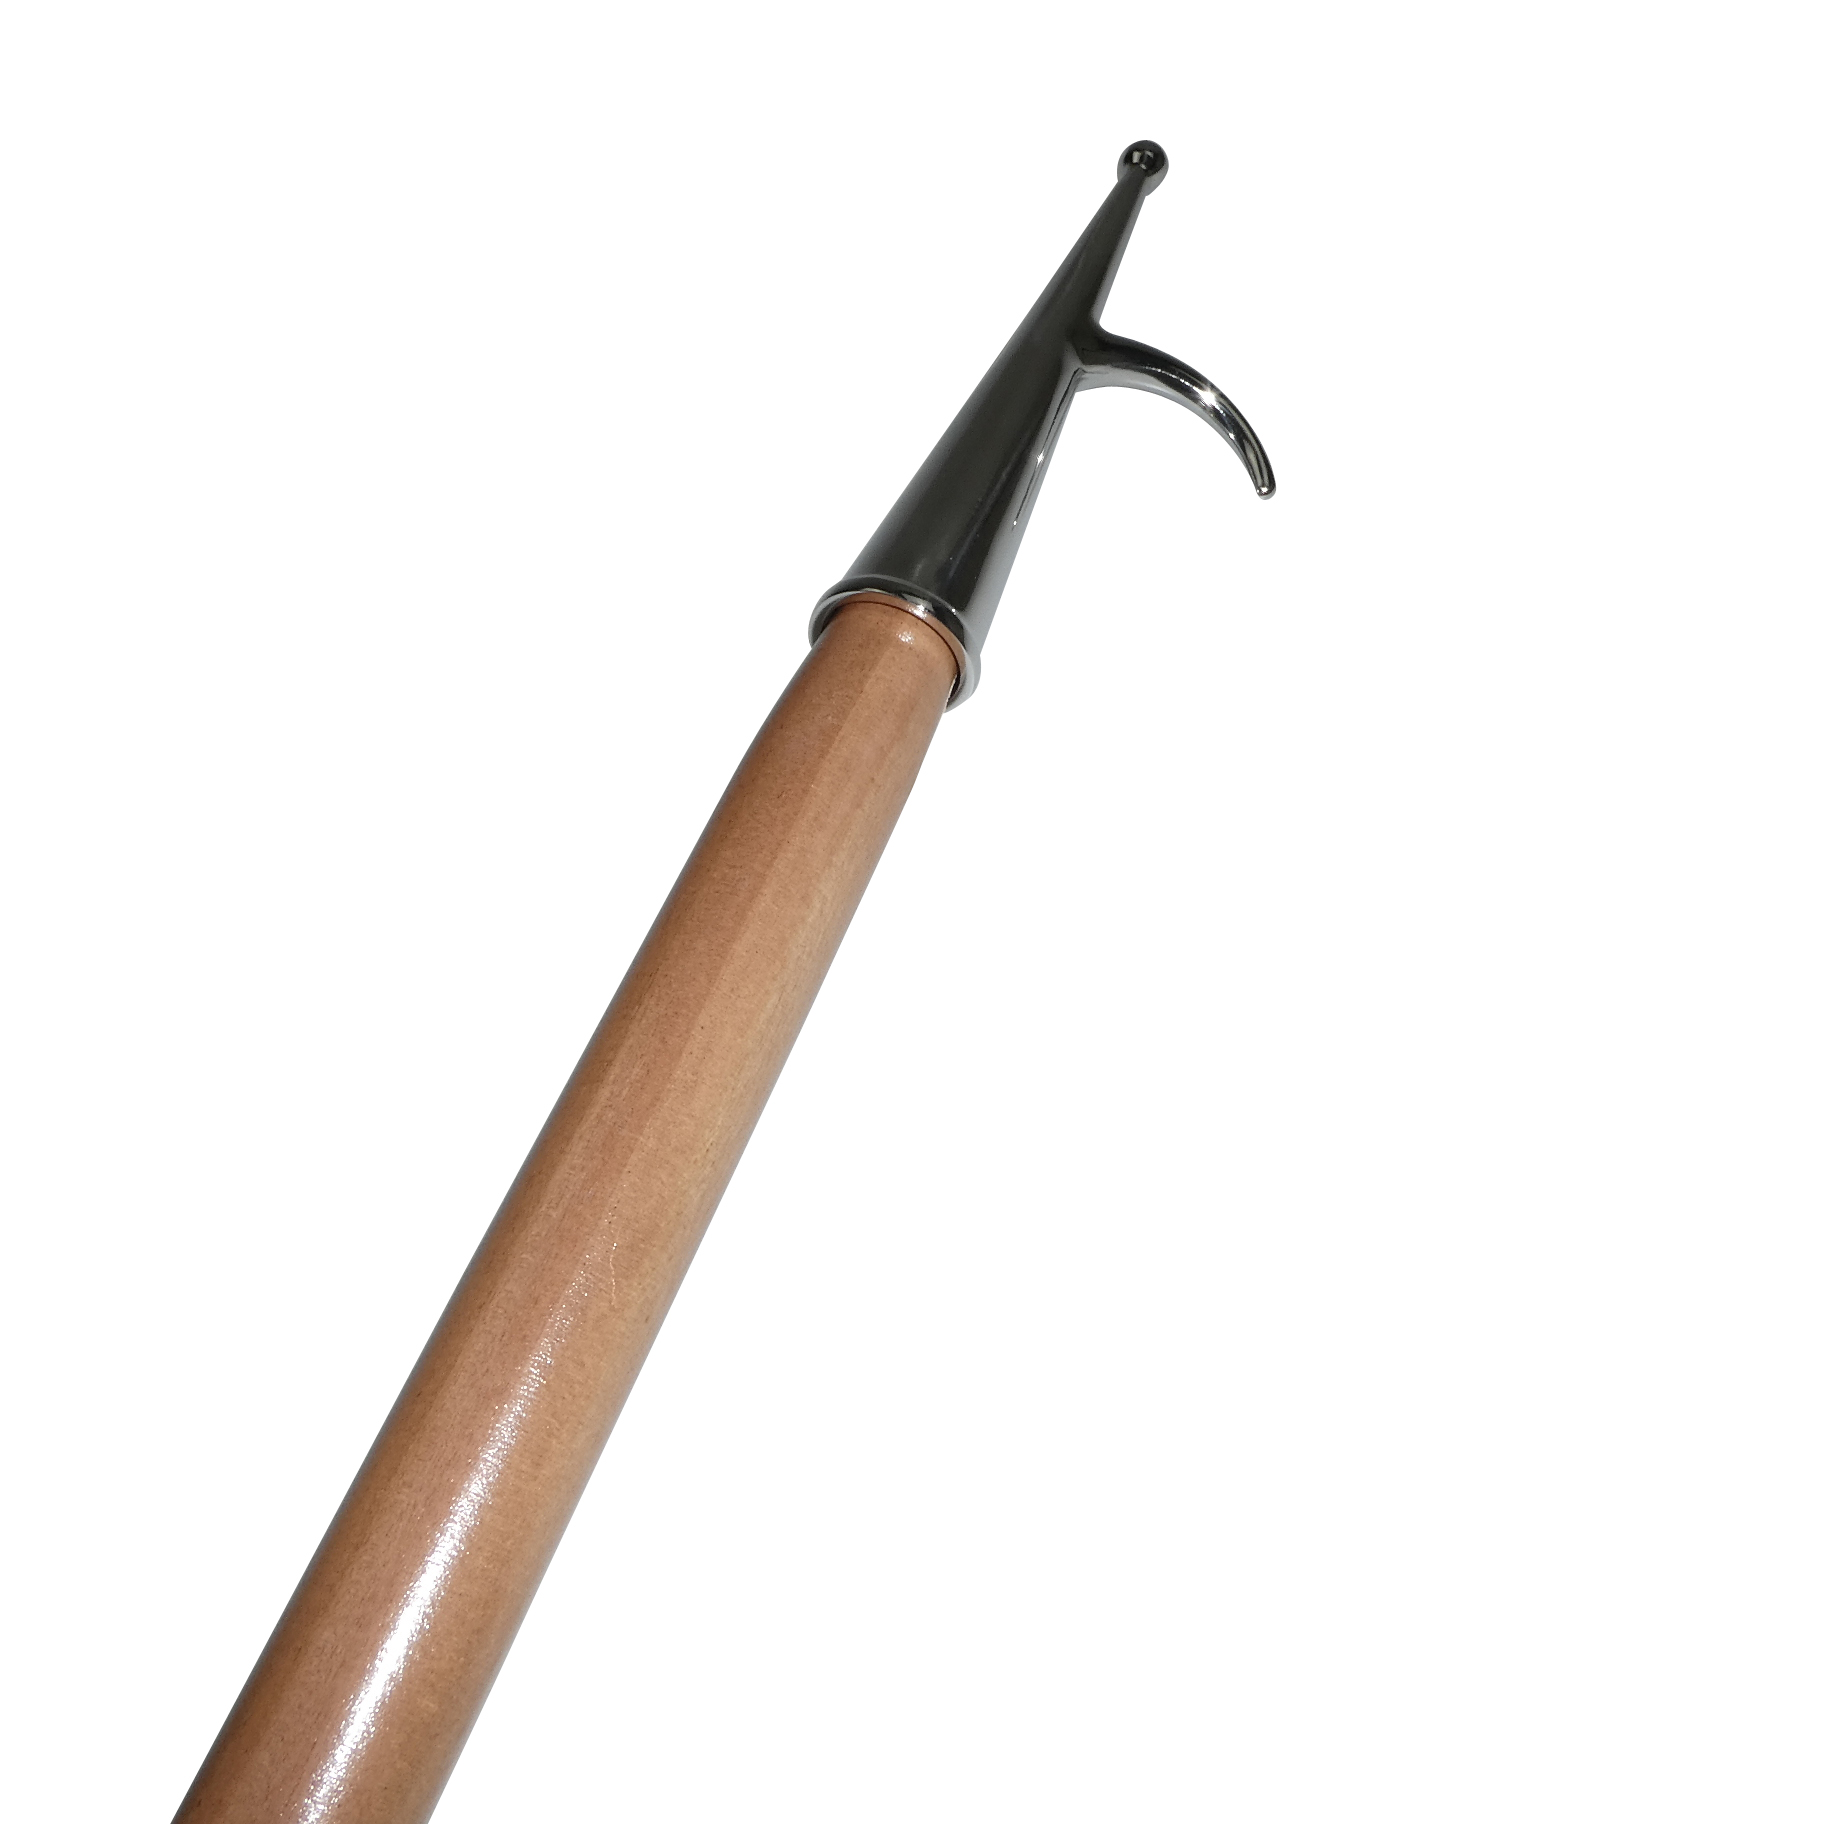 Boat Hook - Wooden Pole with Stainless Steel Hook - 2m Long